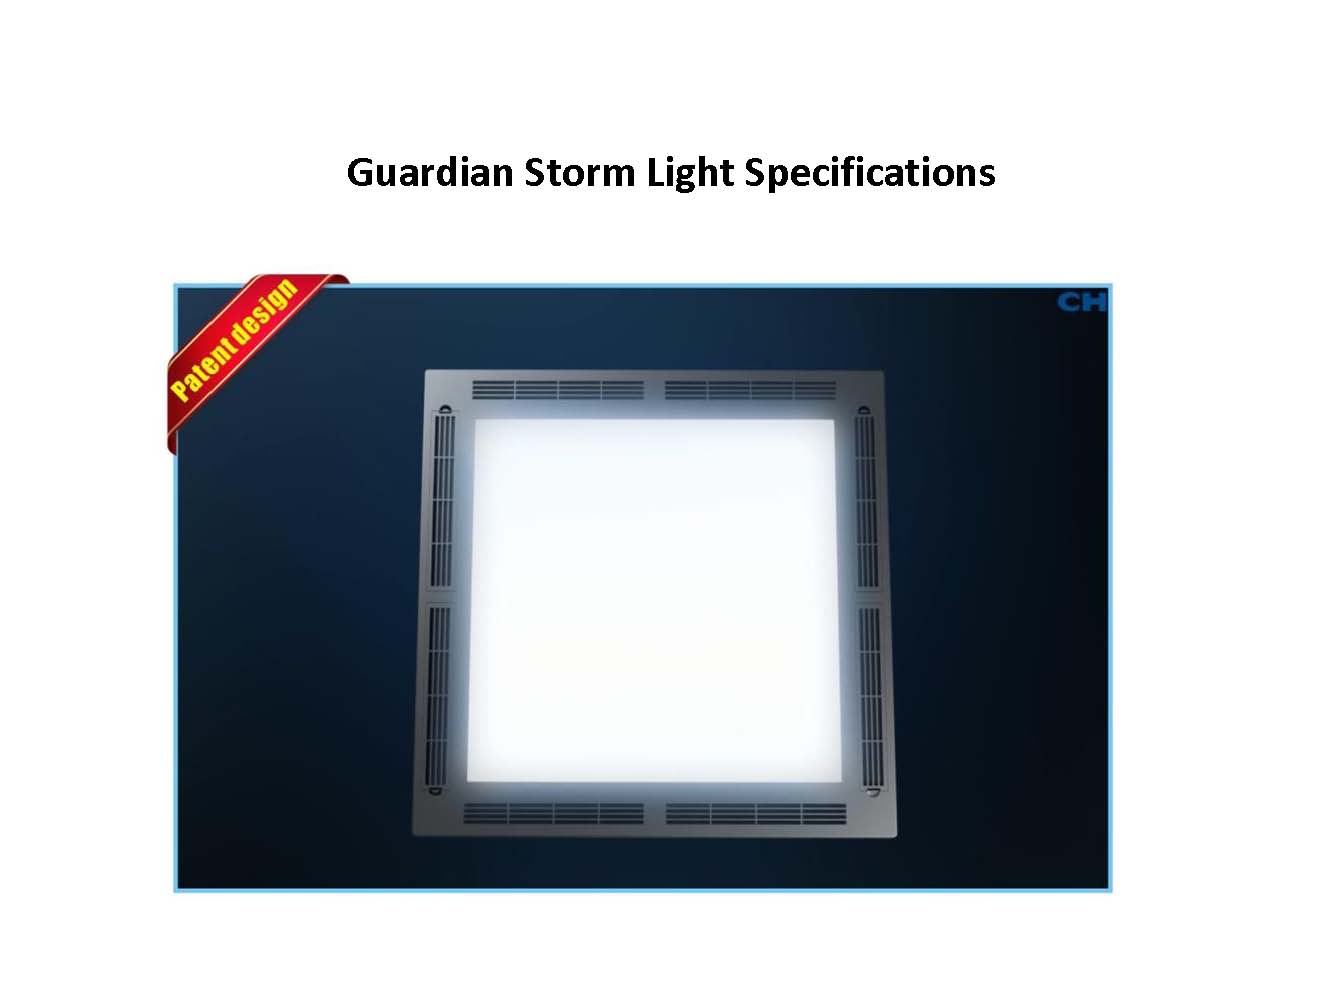 WISCOON Guardian Storm Light Antiseptic and Anti-virus Air Cleaning LED panel light